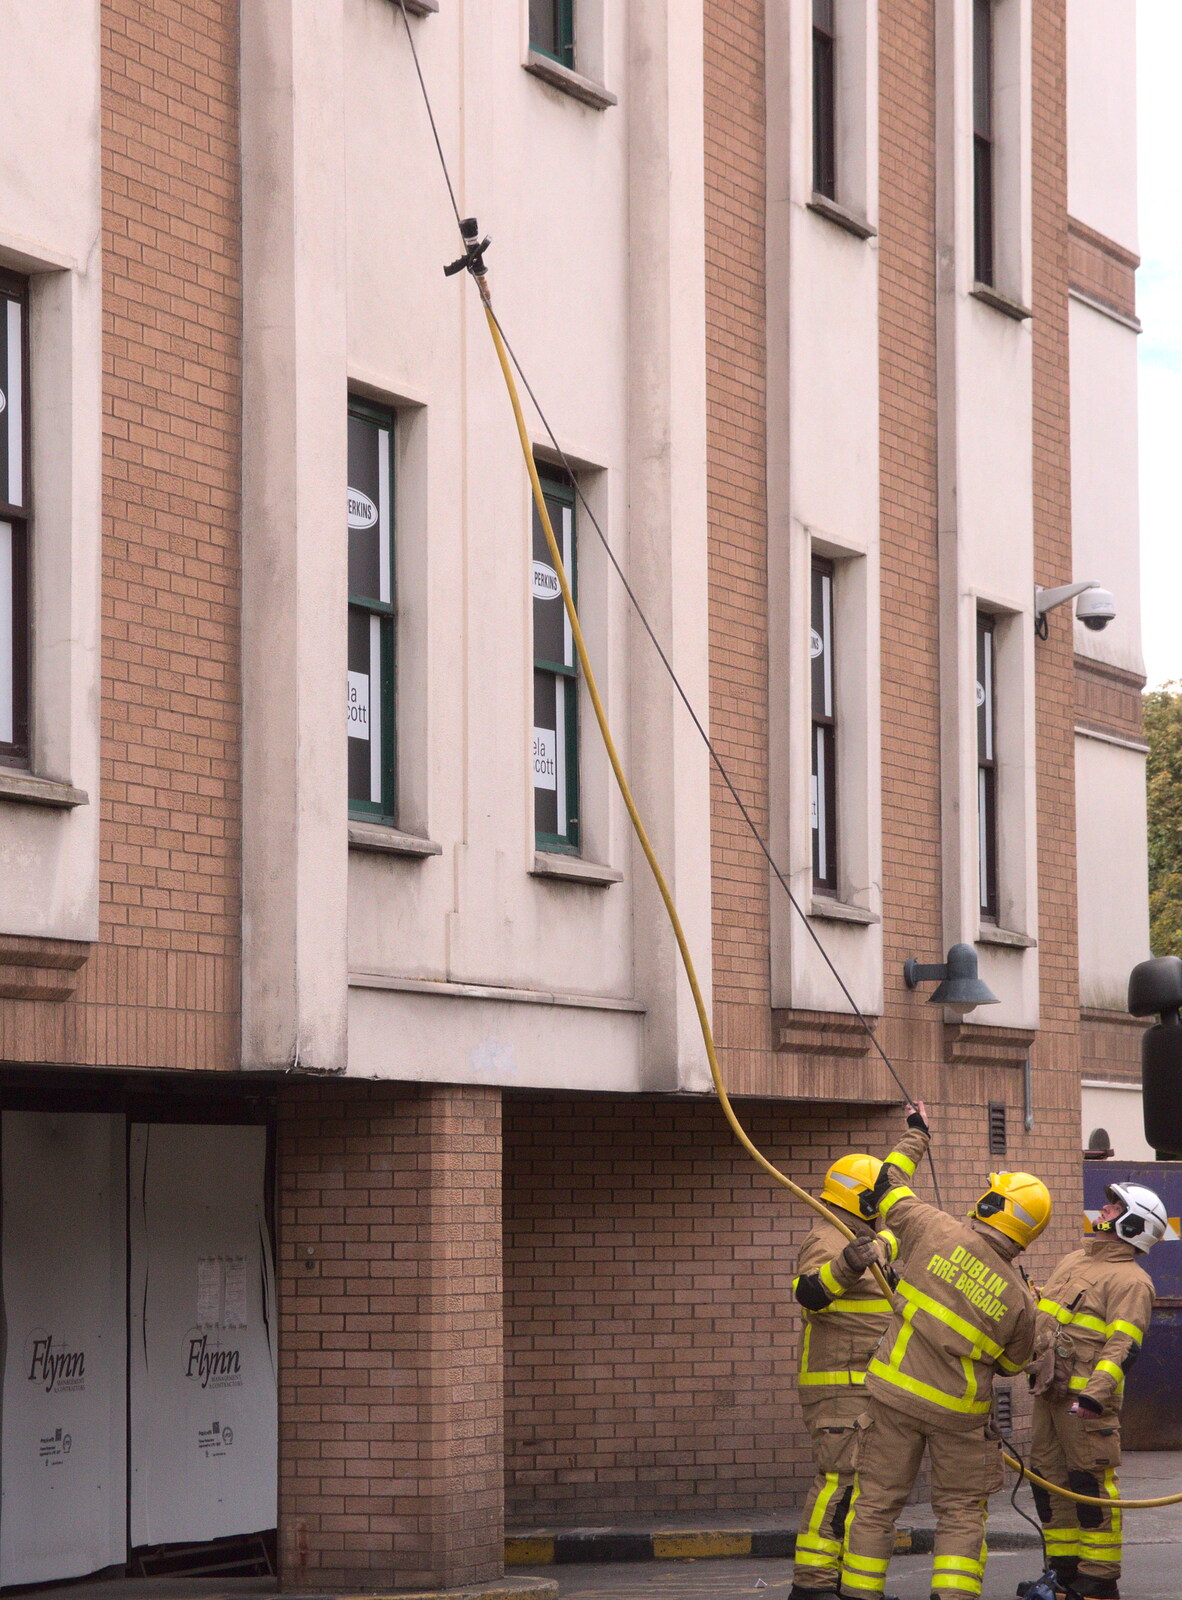 A hose is hauled up to an upstairs office from Fire and Water: The Burning of the Blackrock Centre, County Dublin, Ireland - 12th August 2017